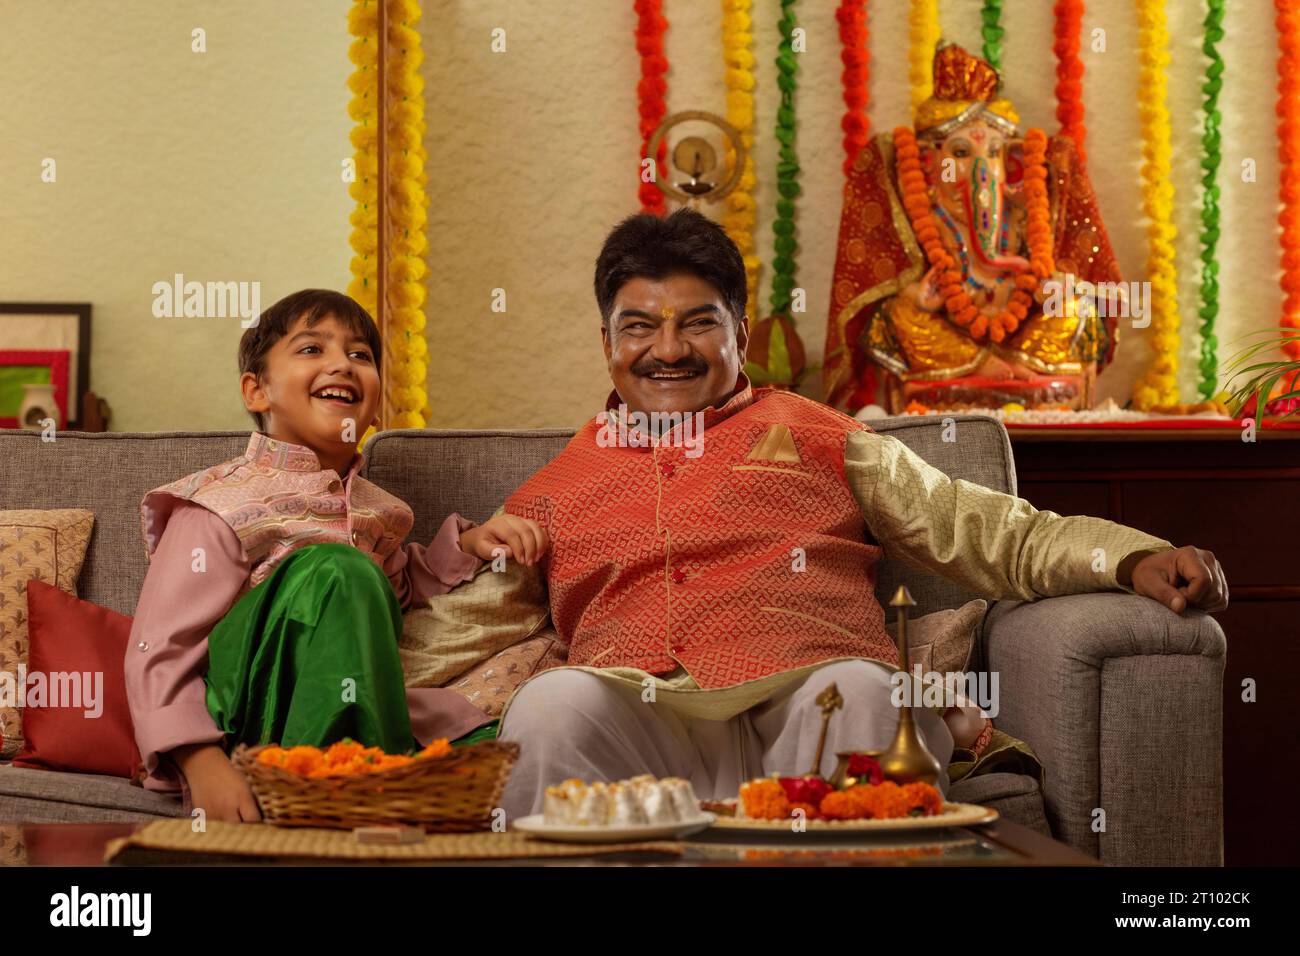 Portrait of grandfather with his grandson sitting together in living room on the occasion of Ganesh Chaturthi Stock Photo